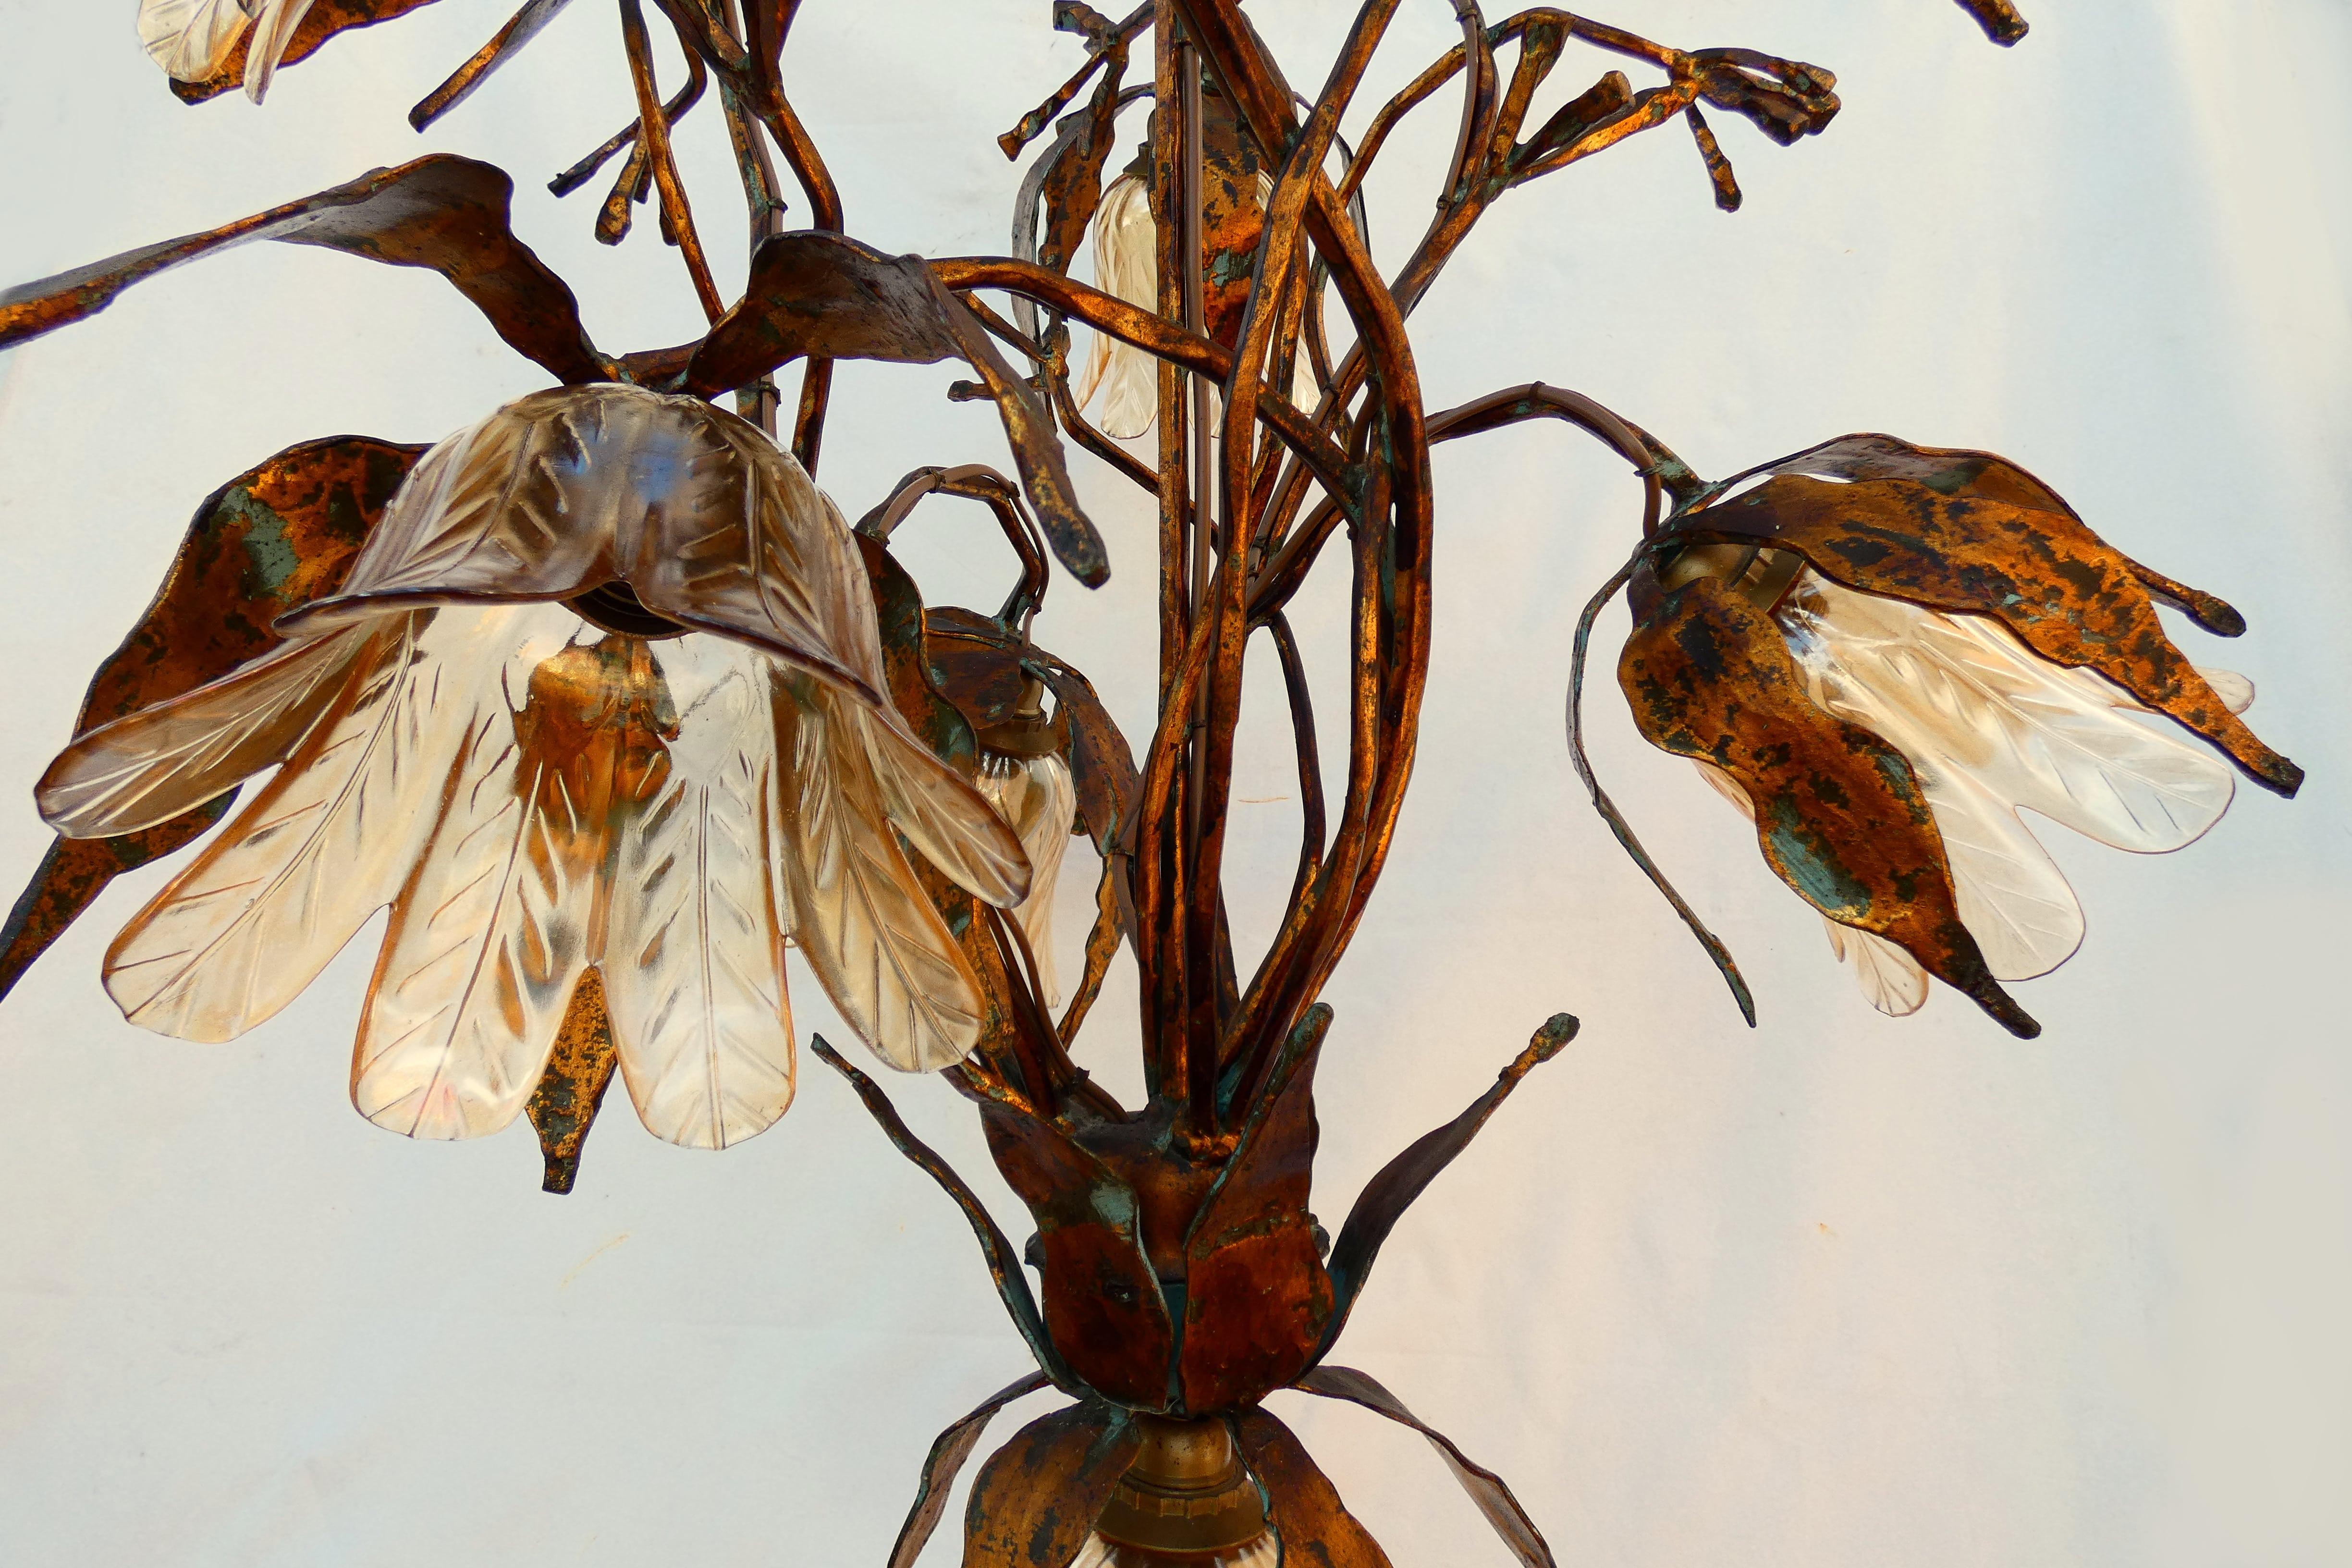 Spectacular lamp in forged metal with floral glass lampshades, showing elegant Art Nouveau lines combined with the strength transmitted by brutalist elements.